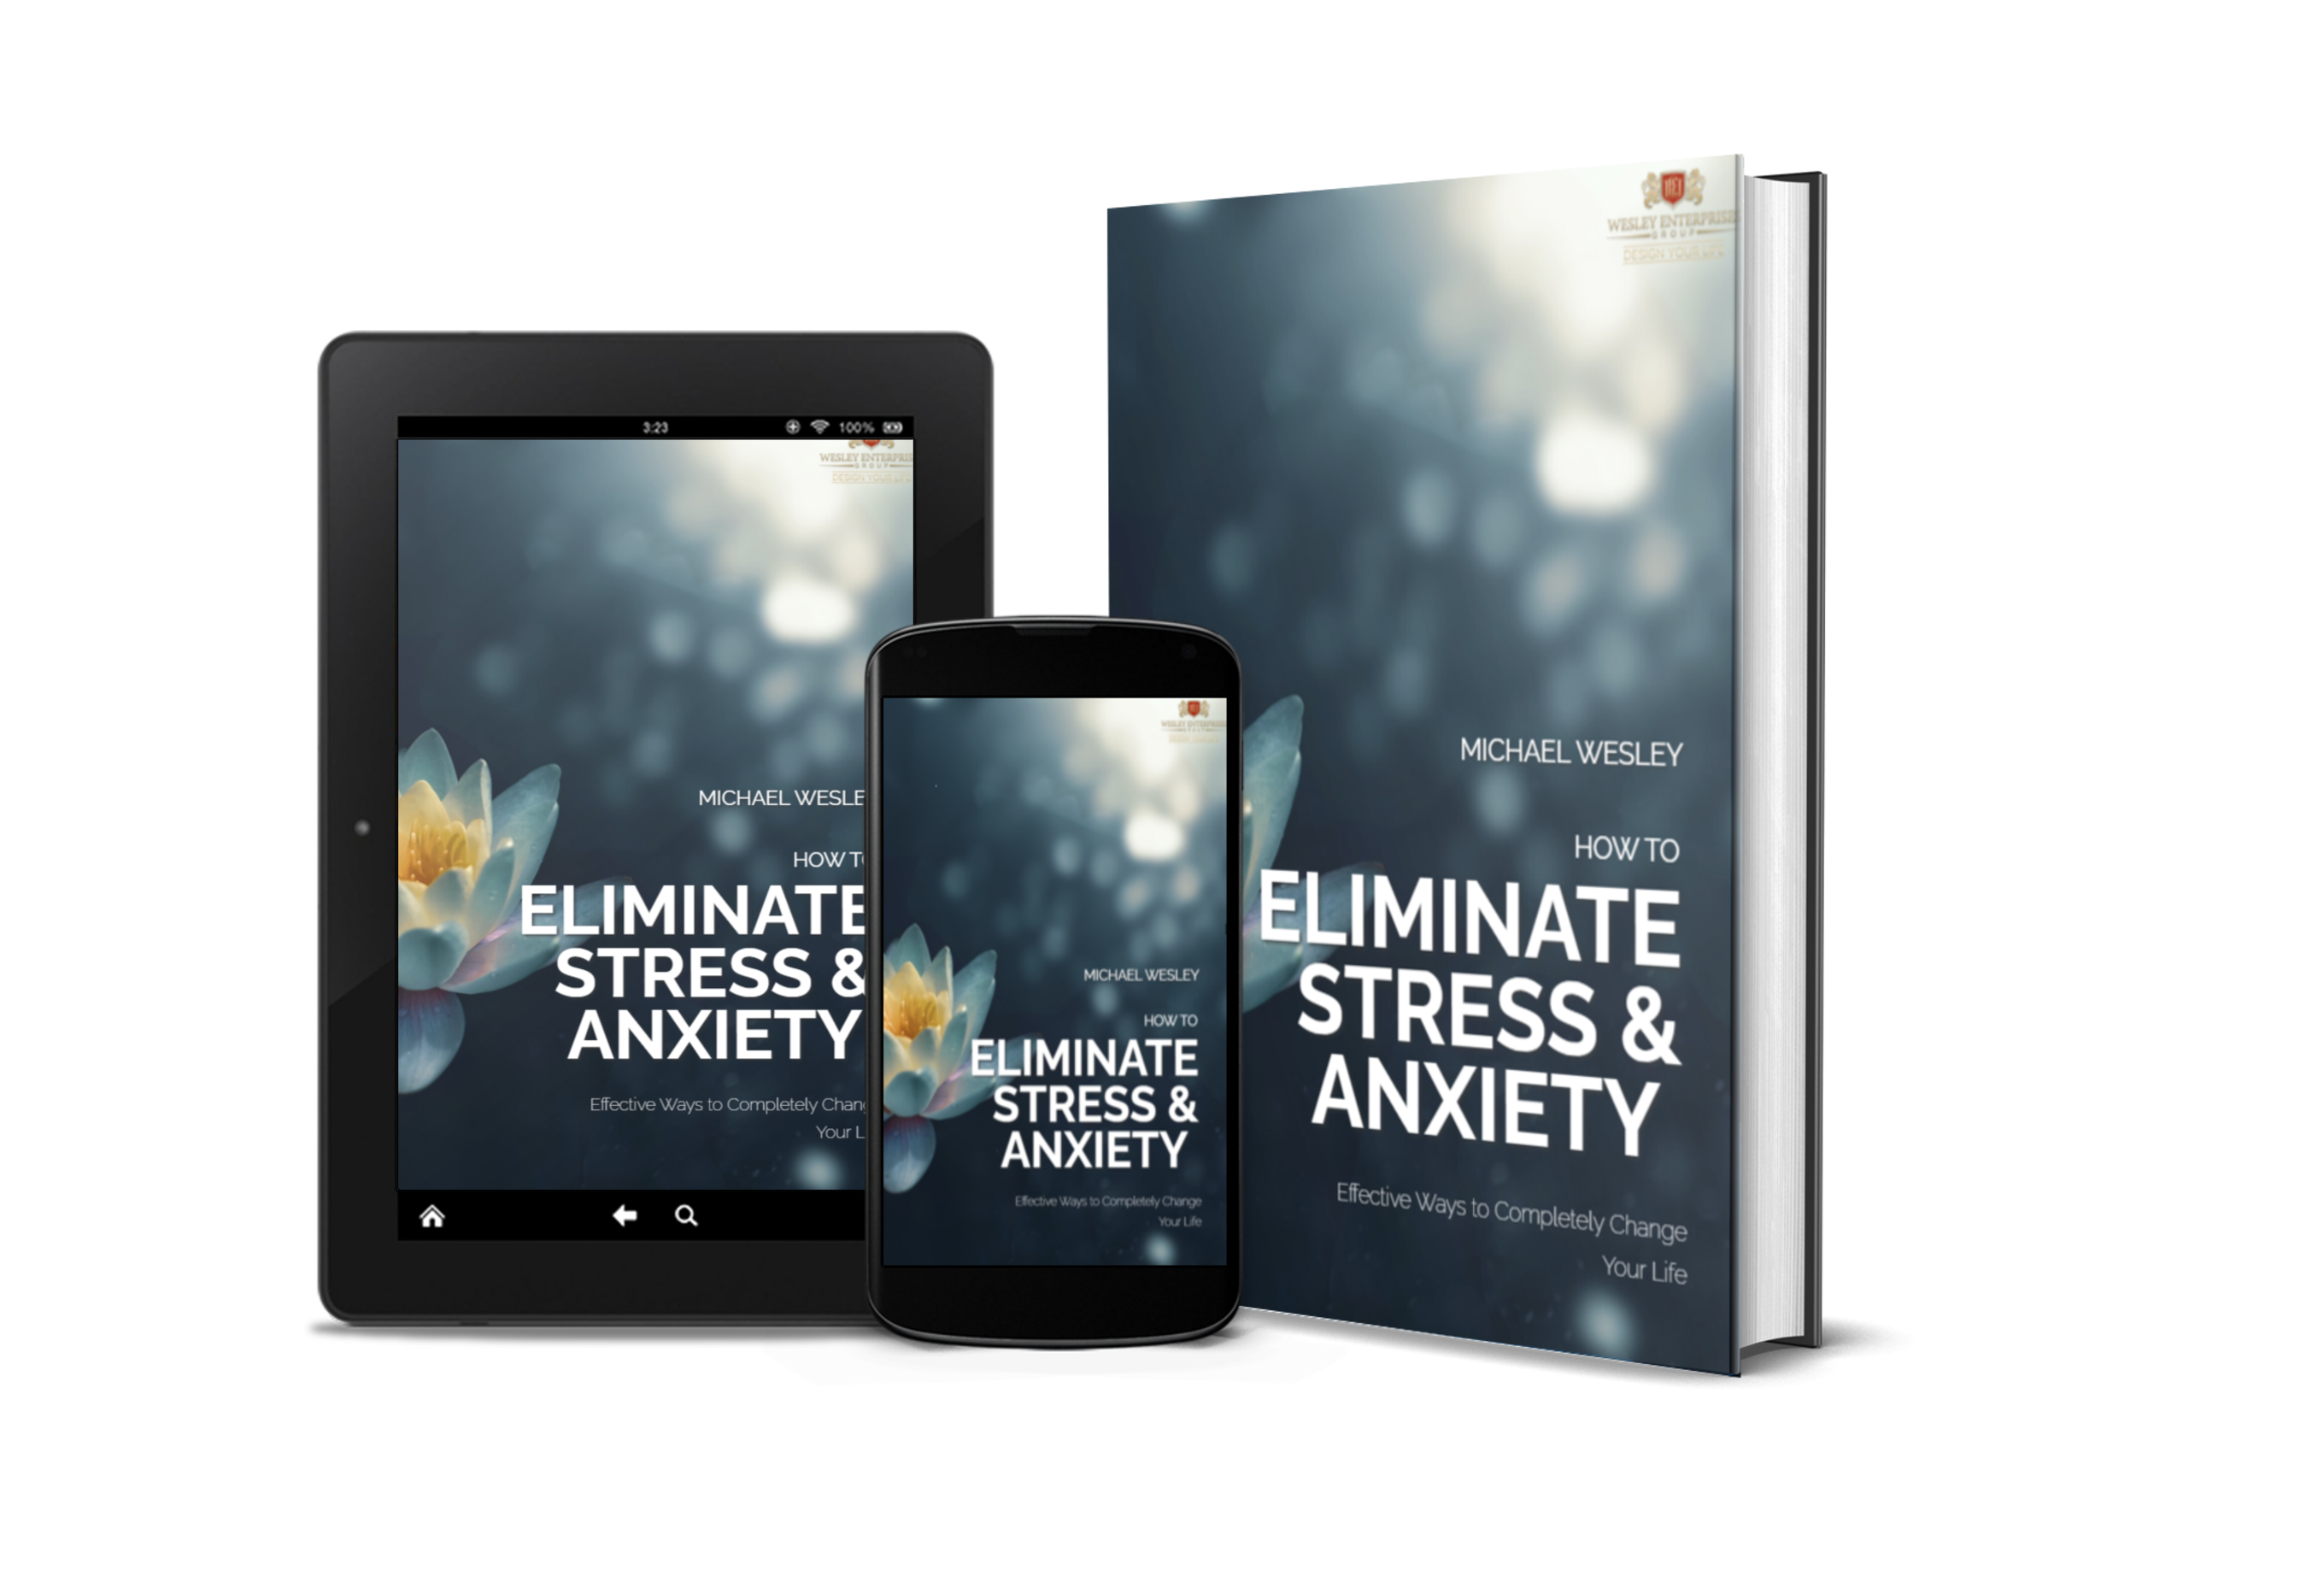 Download our e-book: How to eliminate stress & anxiety